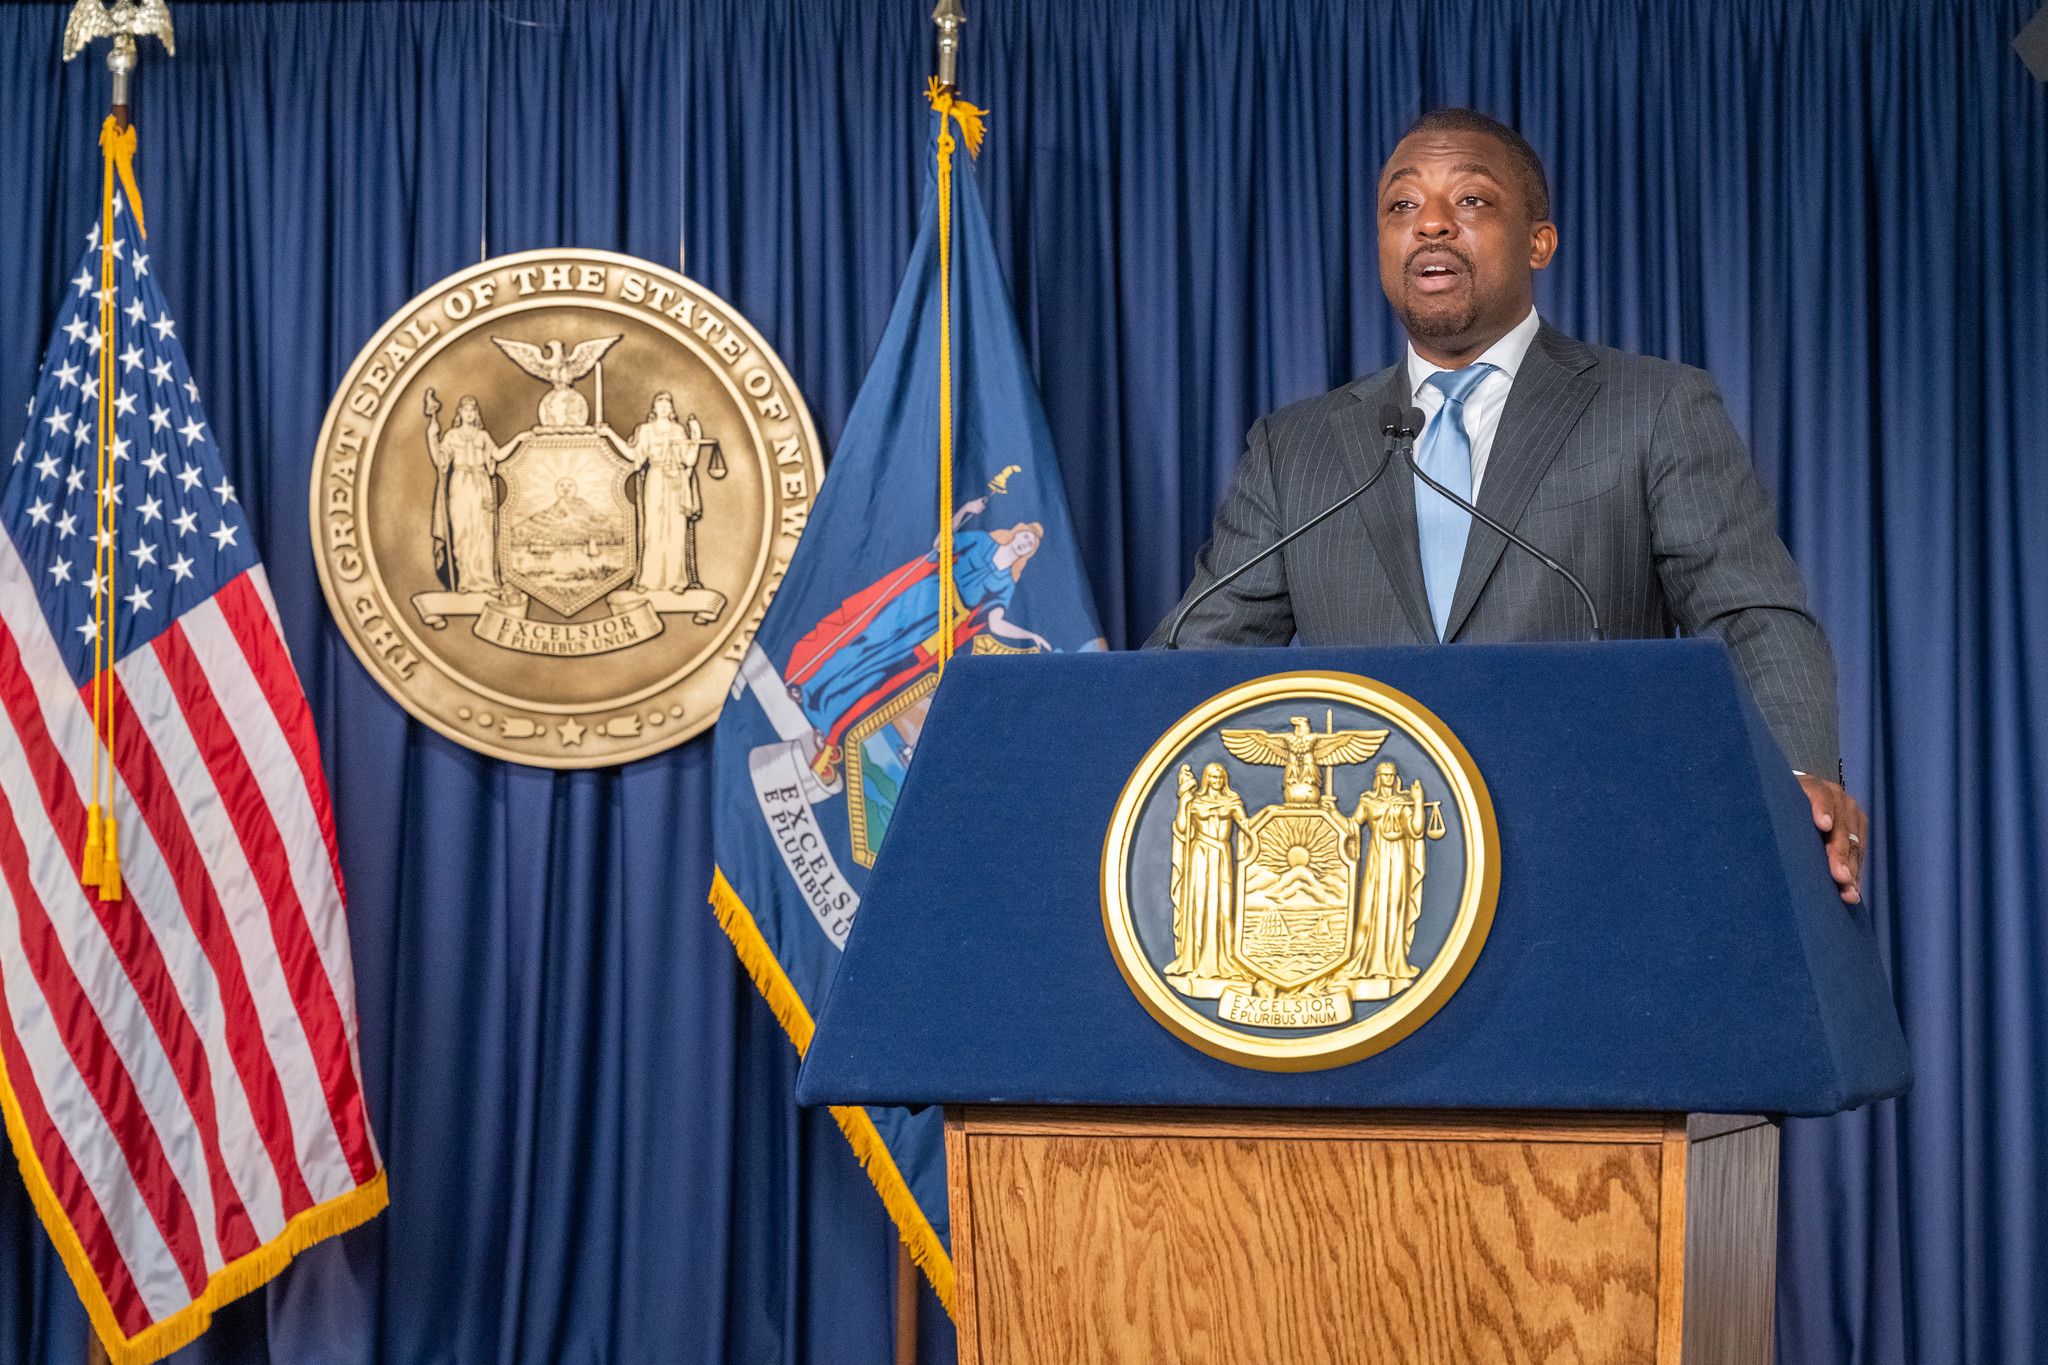 Then-Lt. Gov. Brian Benjamin speaks at a podium with the state seal, the American flag and New York state flag draped in the background.